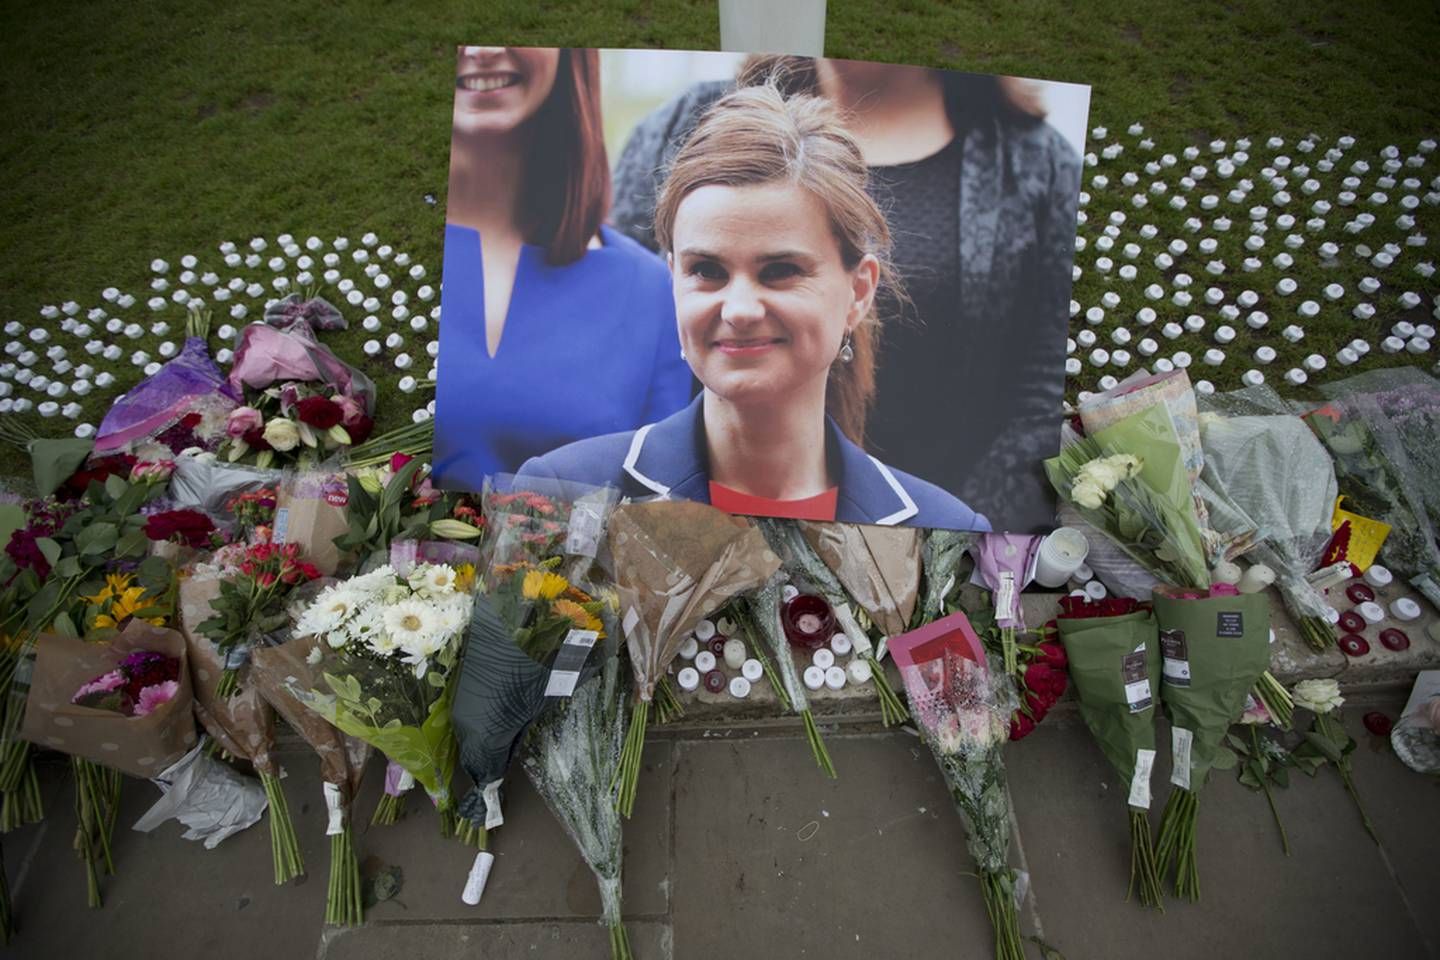 The murder of British MP Jo Cox in 2016 prompted calls for tighter security around politicians. AP